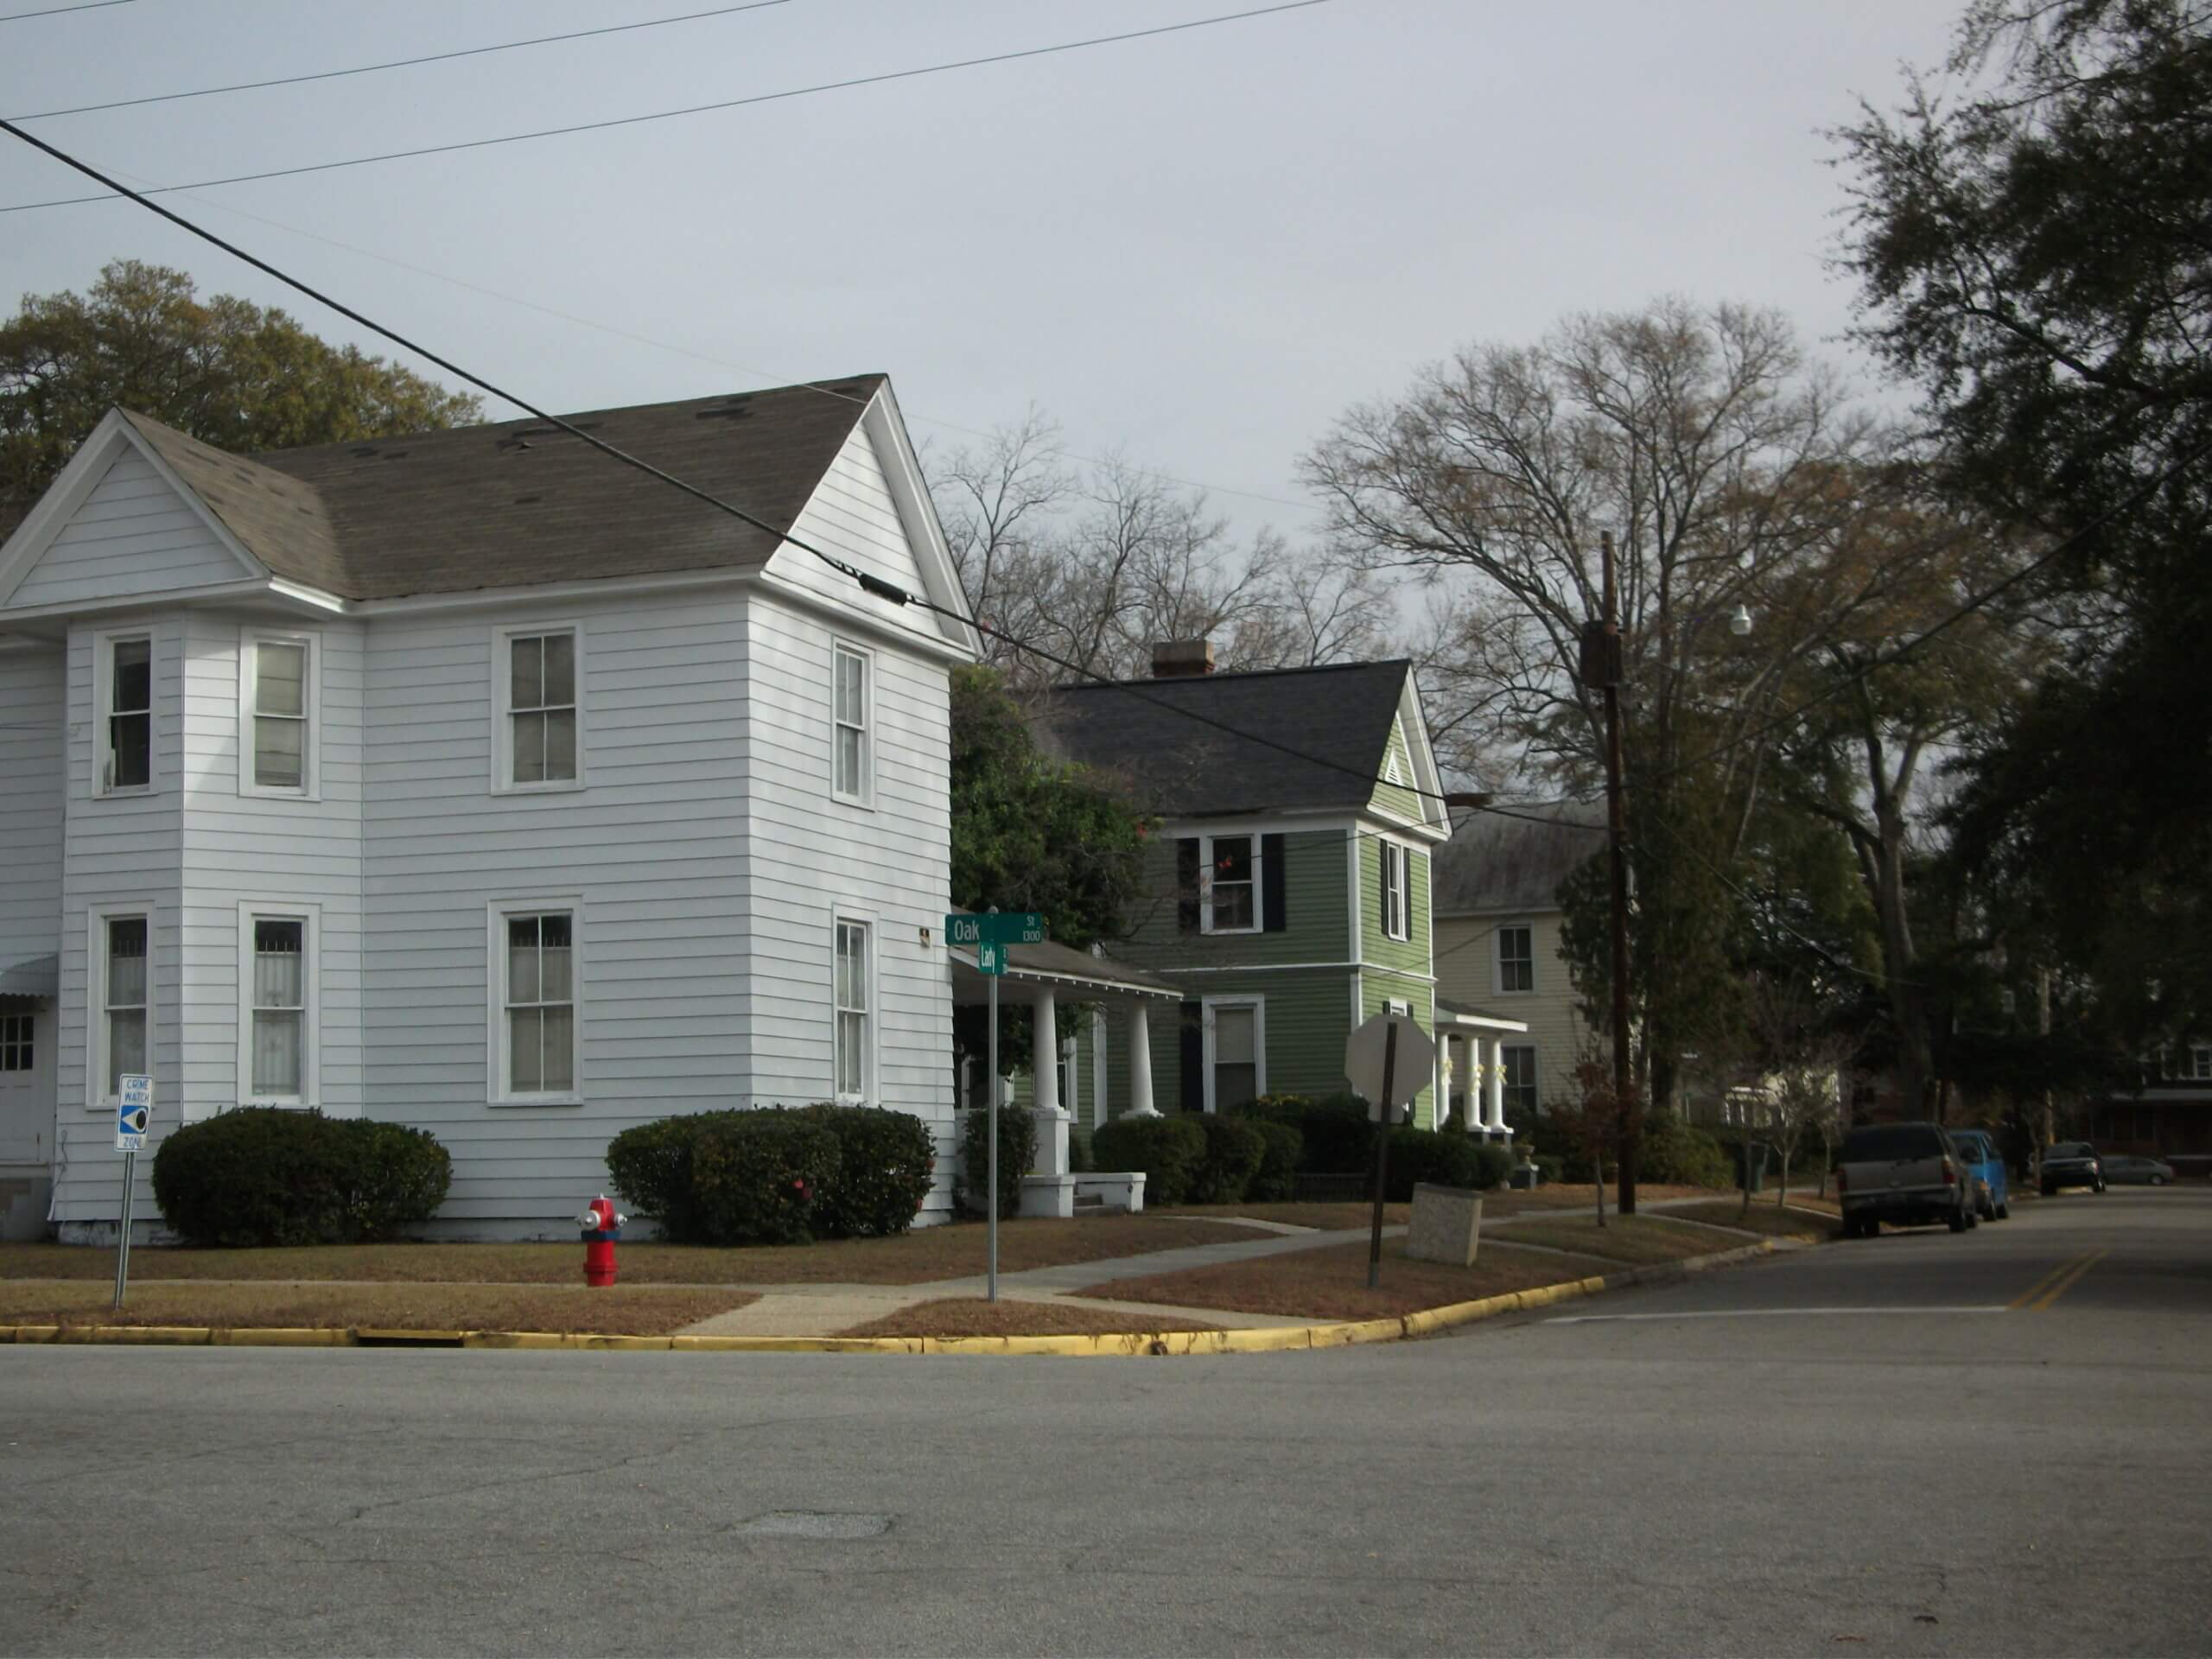 Photograph of a street corner with two-story wood-sided homes